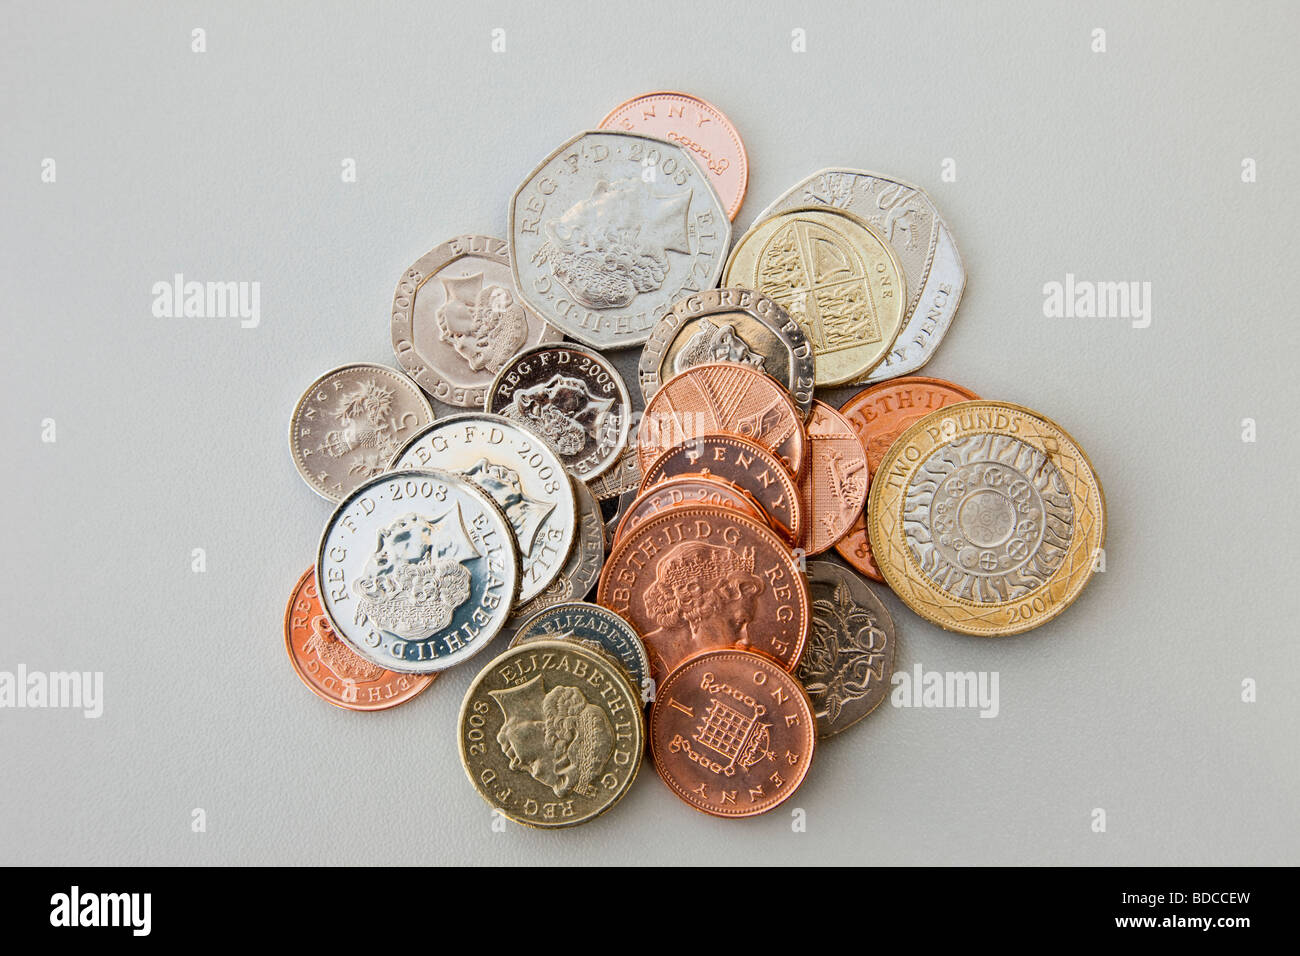 Pile of UK sterling coins in various denominations from above. England UK Britain Stock Photo